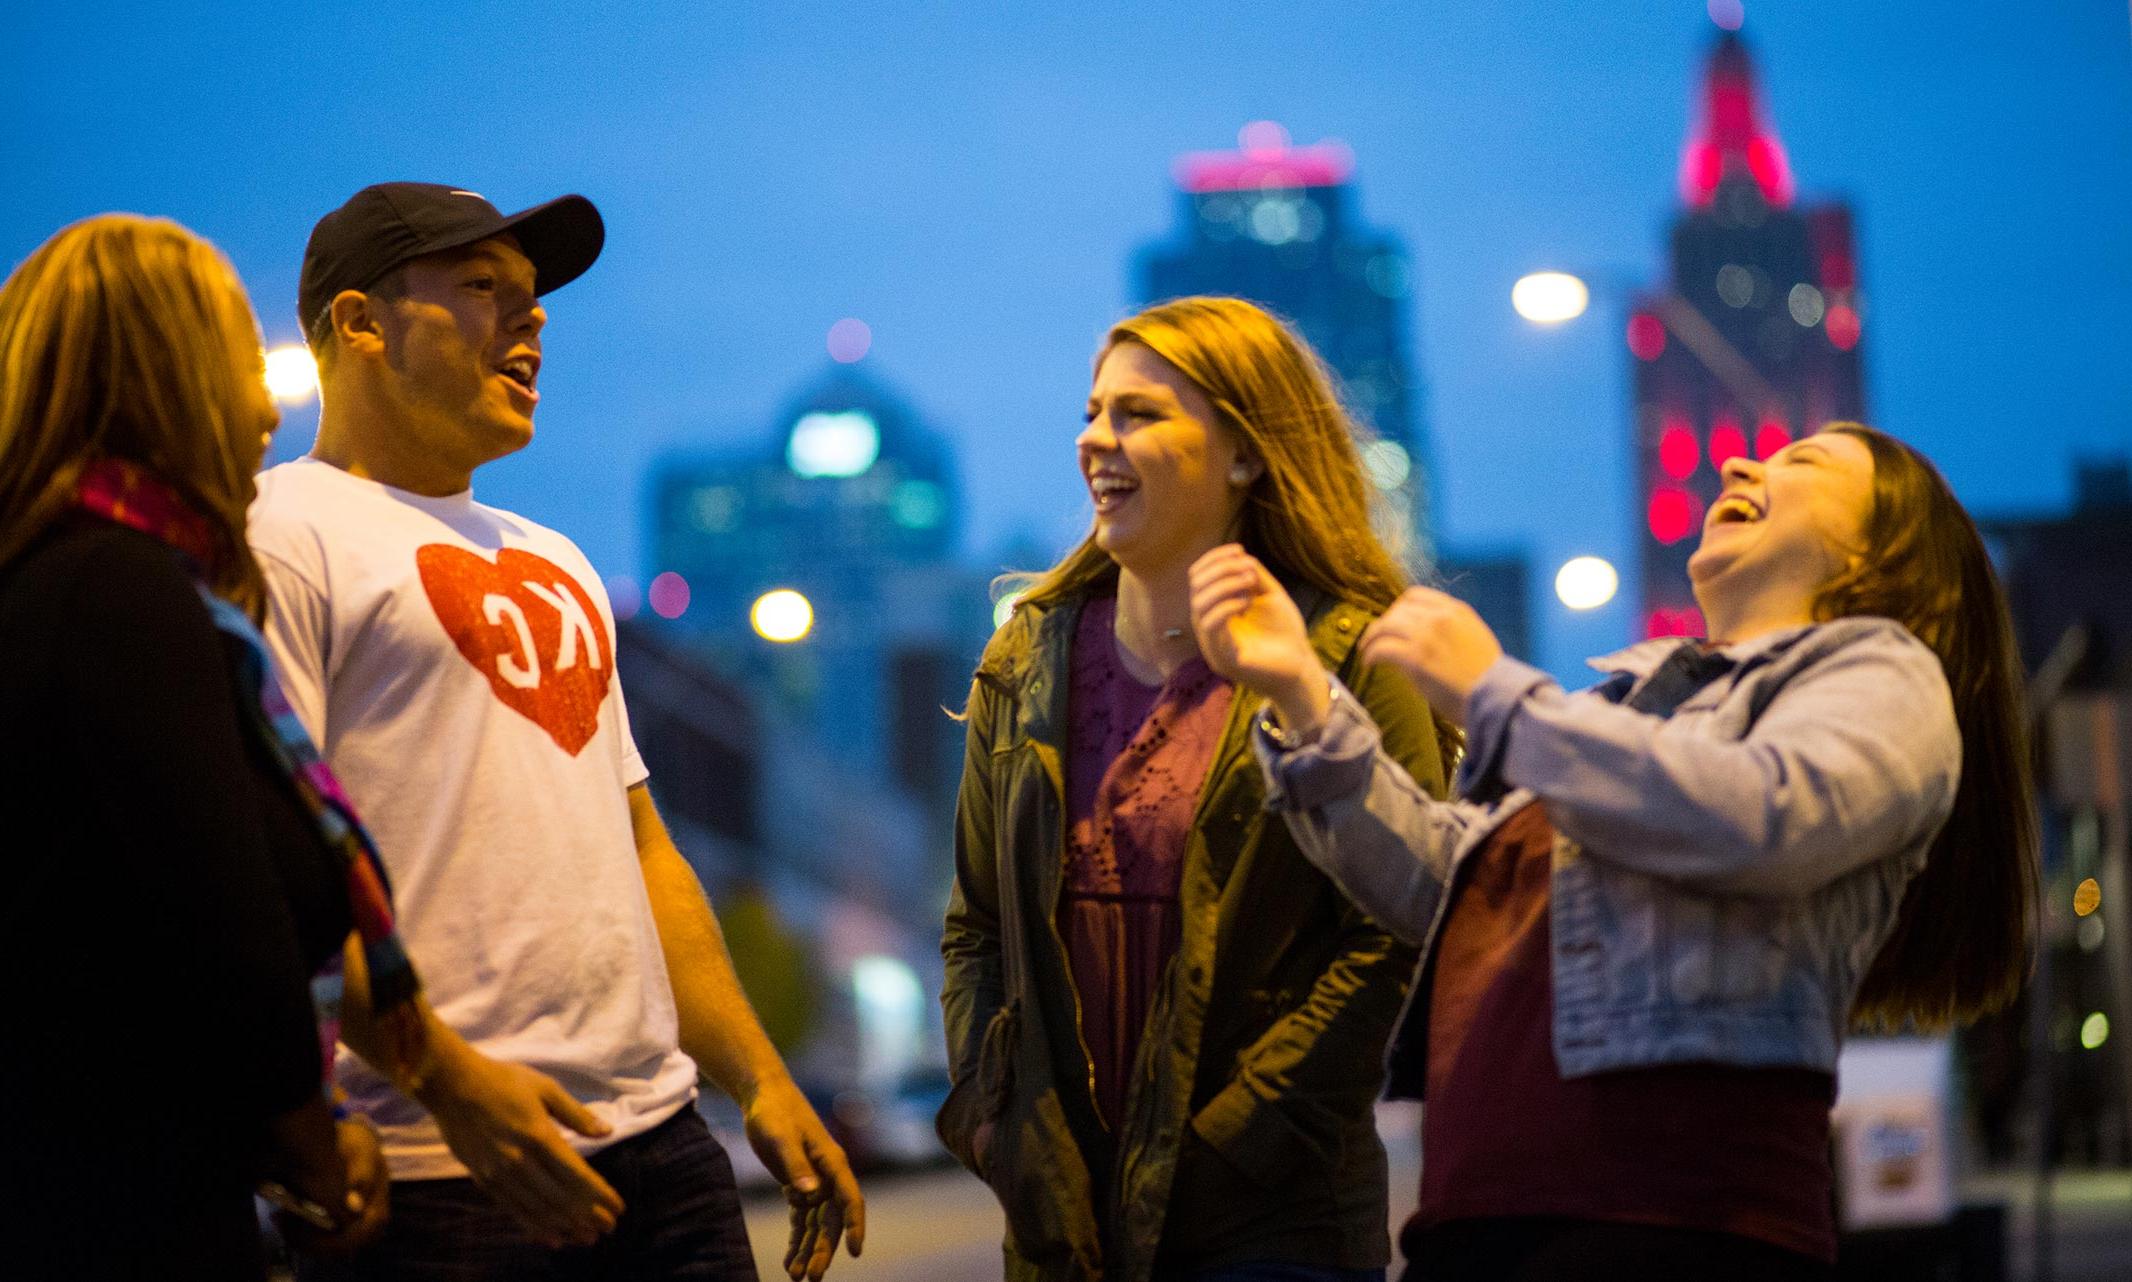 Four people having a joyful conversation with Kansas City skyline in the background